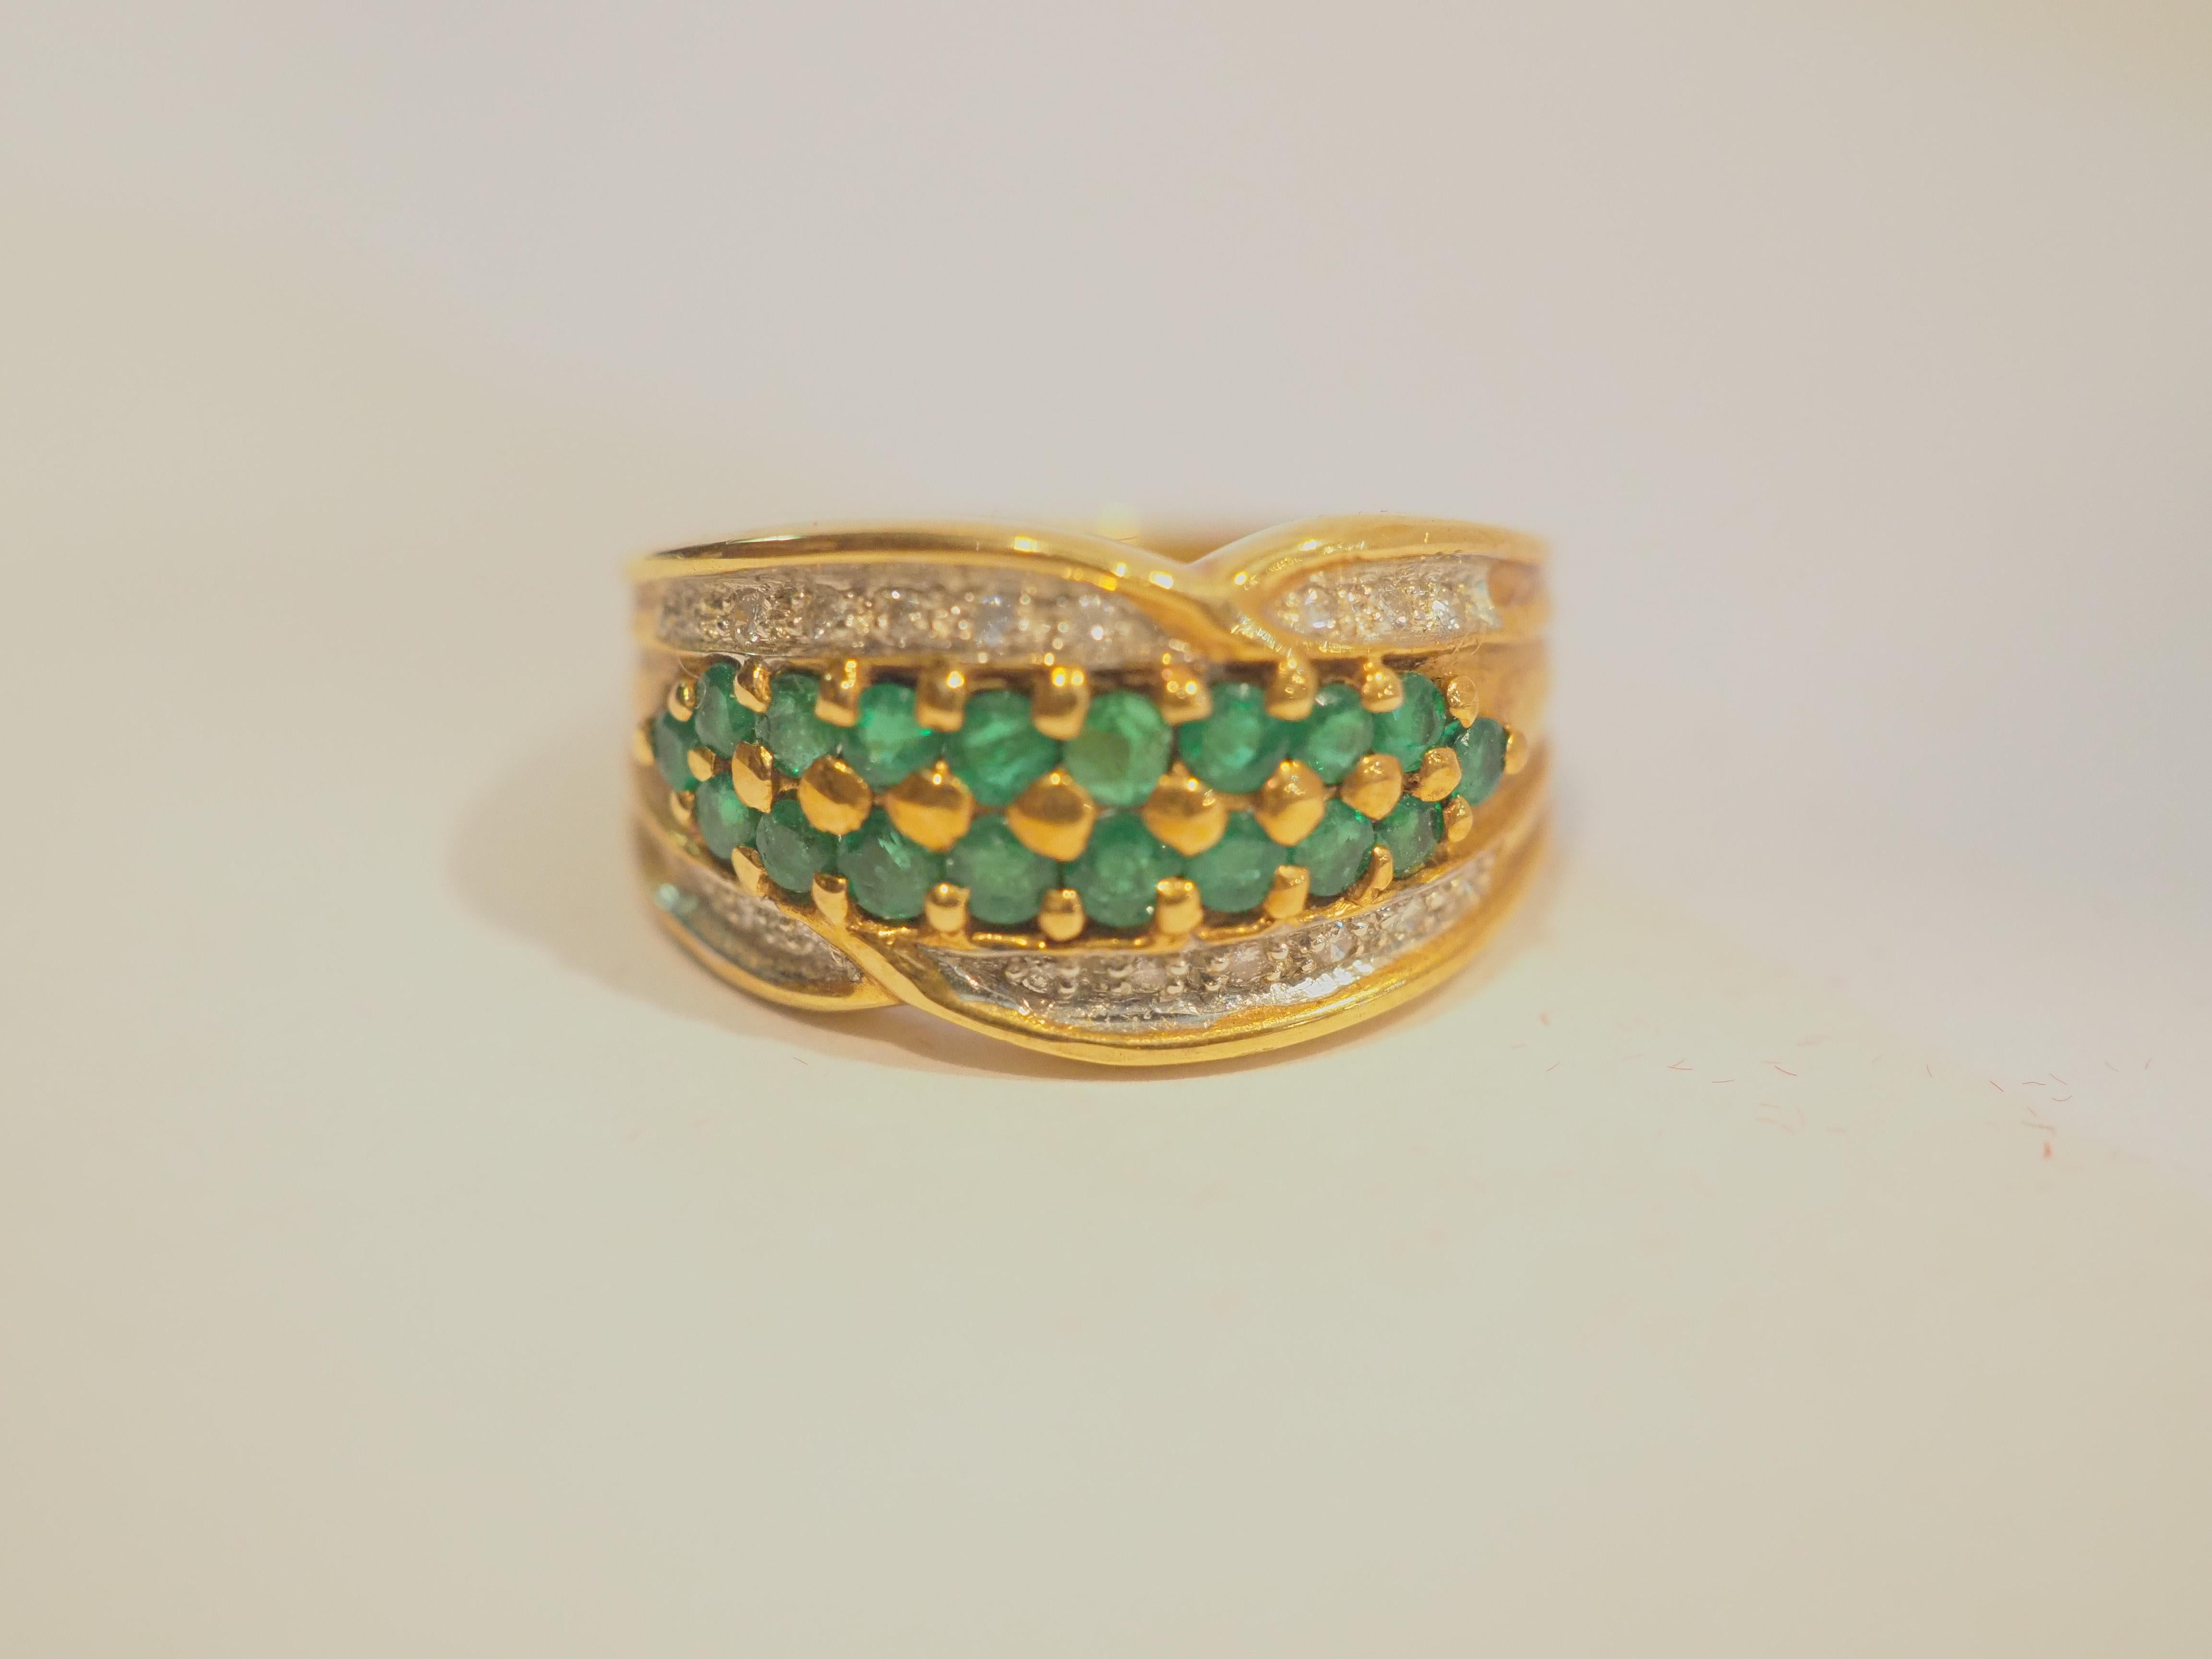 A gorgeous luxury Neo-vintage chunky and fancy band ring that is unworn. This ring is immaculately designed. The round cut emeralds have a beautiful deep green hue, and the round diamonds are very bright and clean. This ring is perfect for fashion